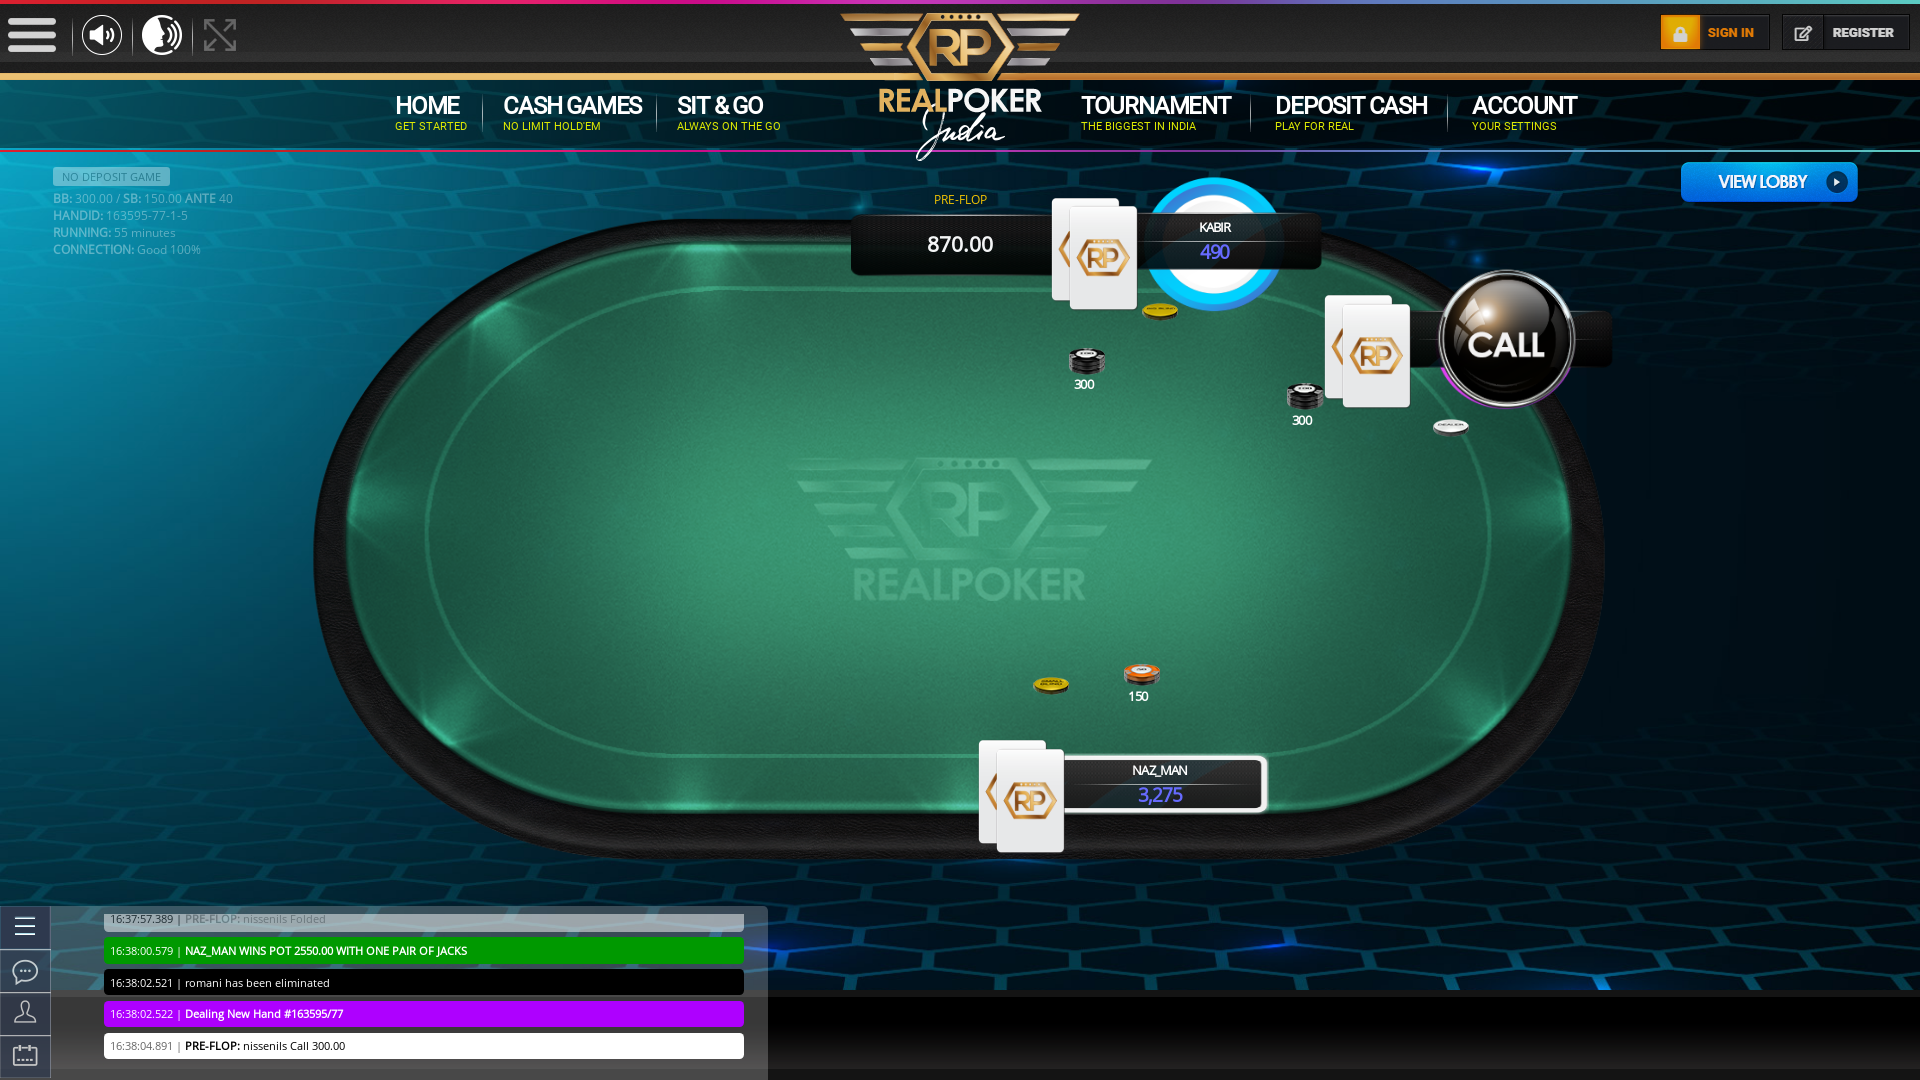 Real poker 10 player table in the 55th minute of the match